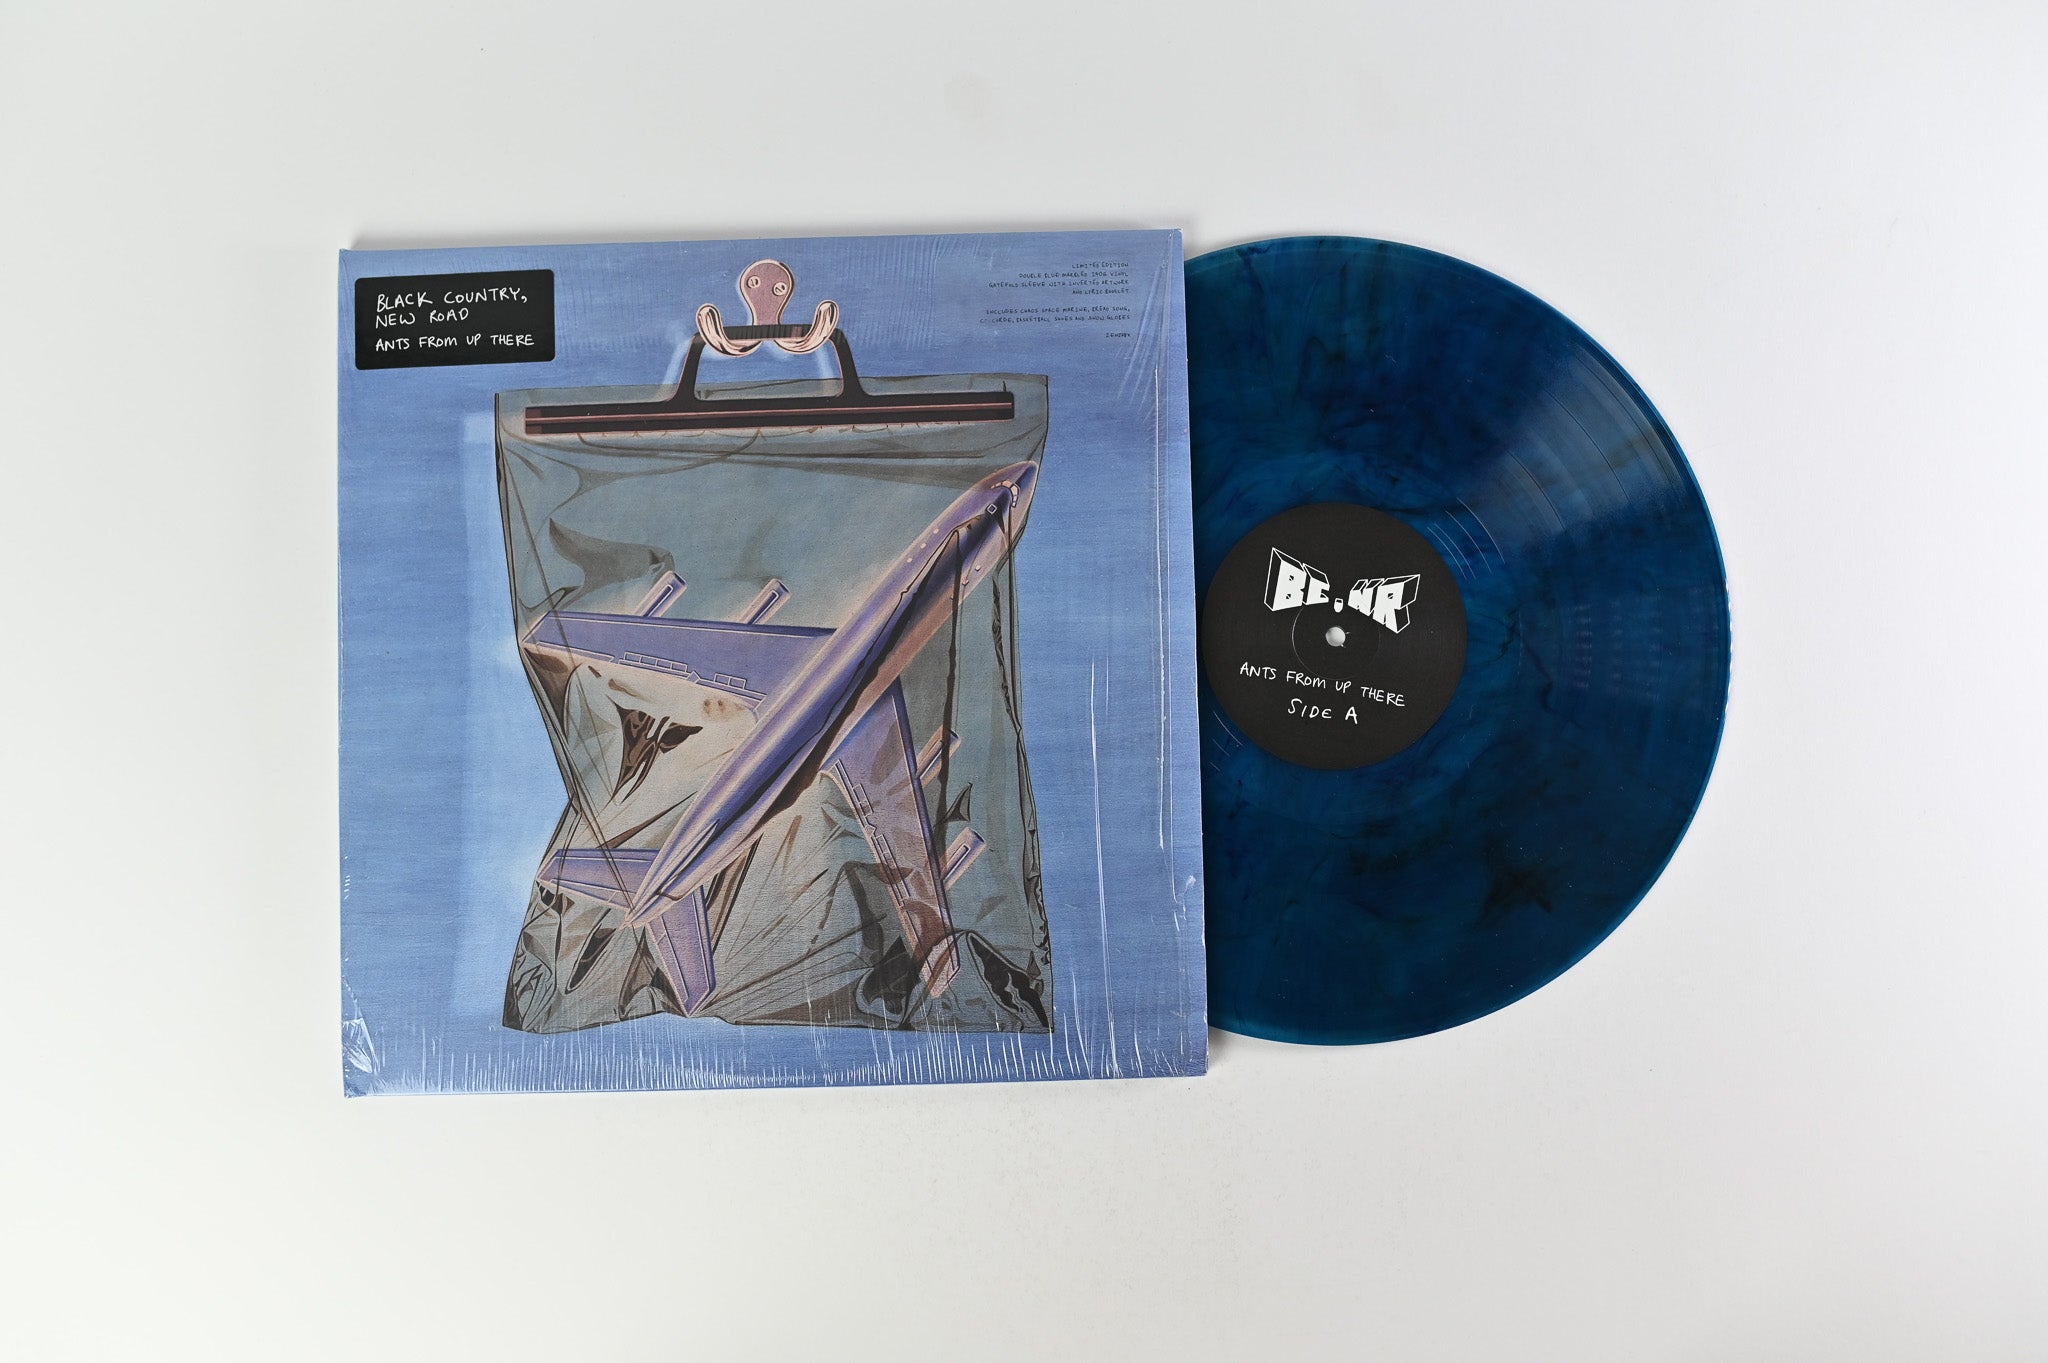 Black Country, New Road - Ants From Up There on Ninja Tune Blue Marbled Vinyl